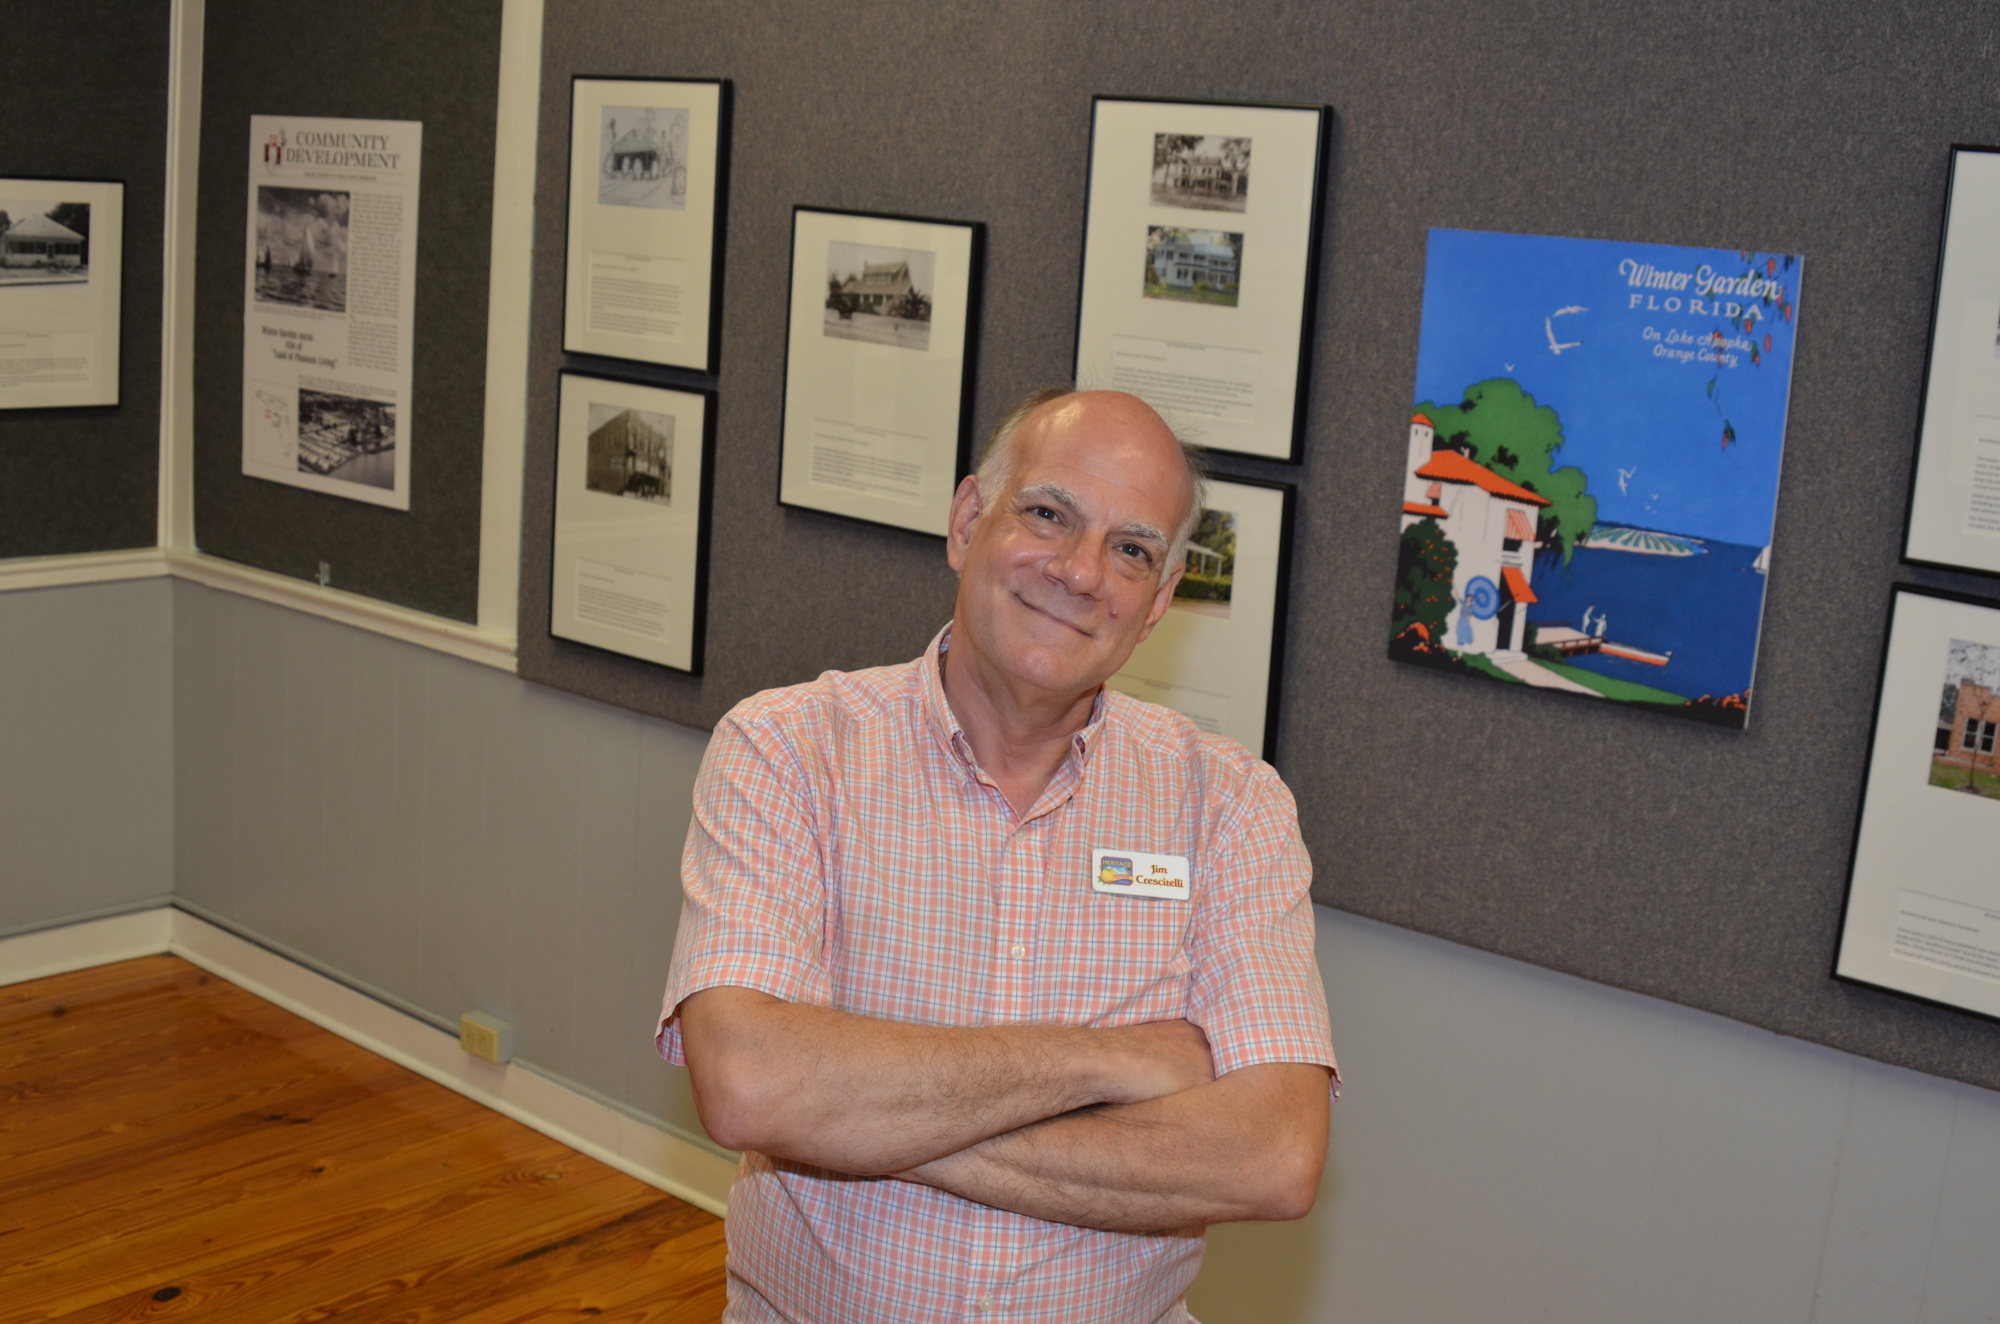 WGHF program director Jim Crescitelli assisted in the creation of the residential architecture display at the Winter Garden Heritage Museum.